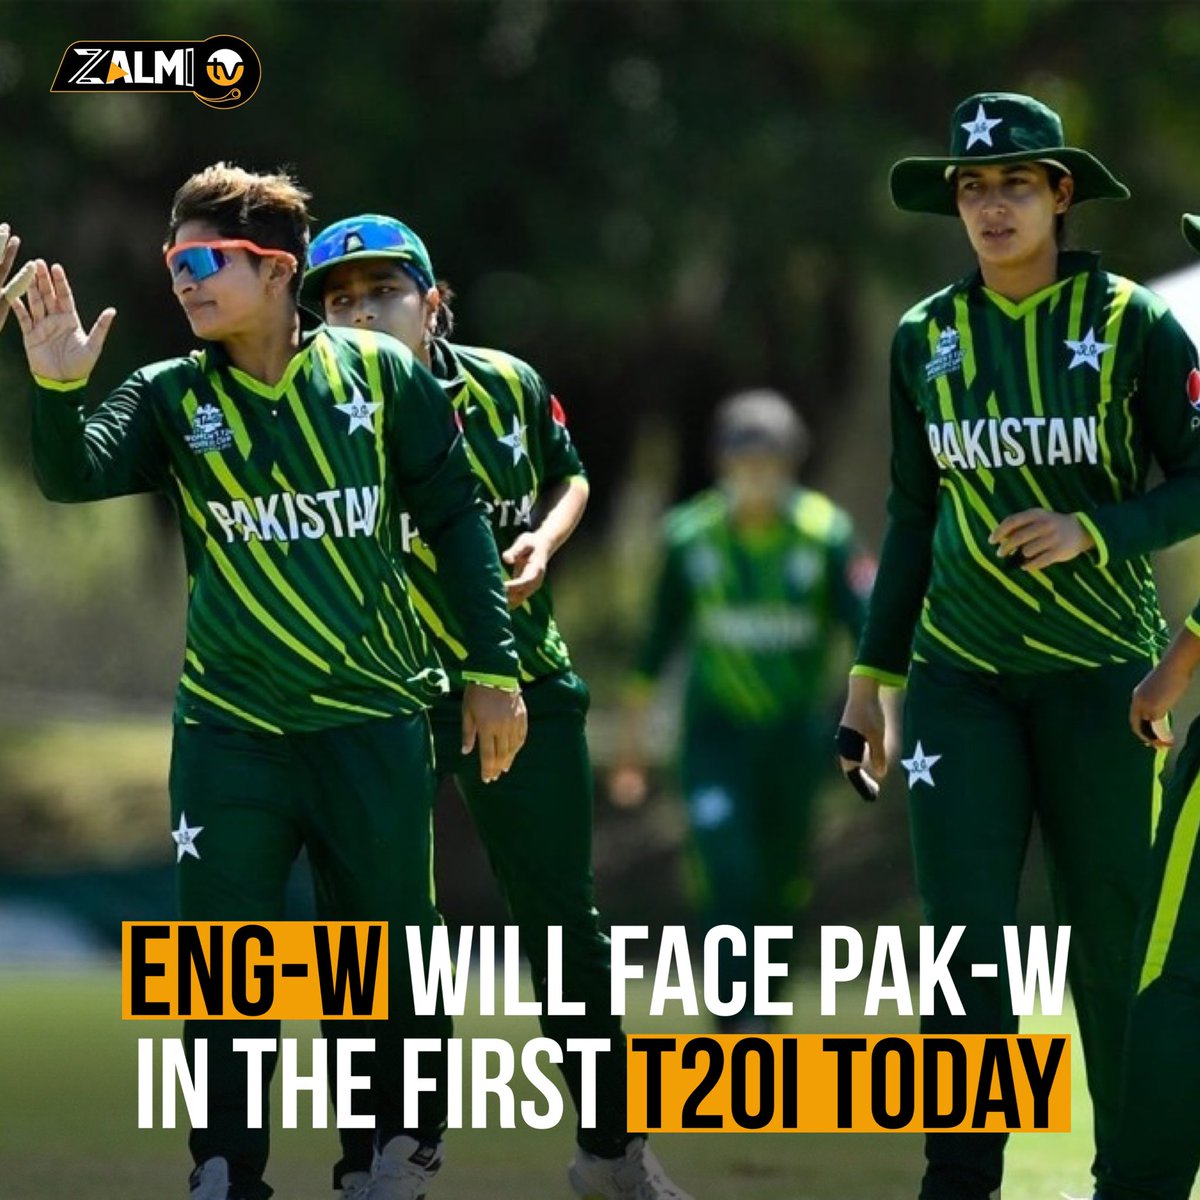 The first ENG-W vs PAK-W T20I match is scheduled to take place today on May 11, 2024 at Edgbaston in Birmingham. The match is set to start at 7:00 PM IST. #ENGvPAK #PakistanCricket #ZalmiTV